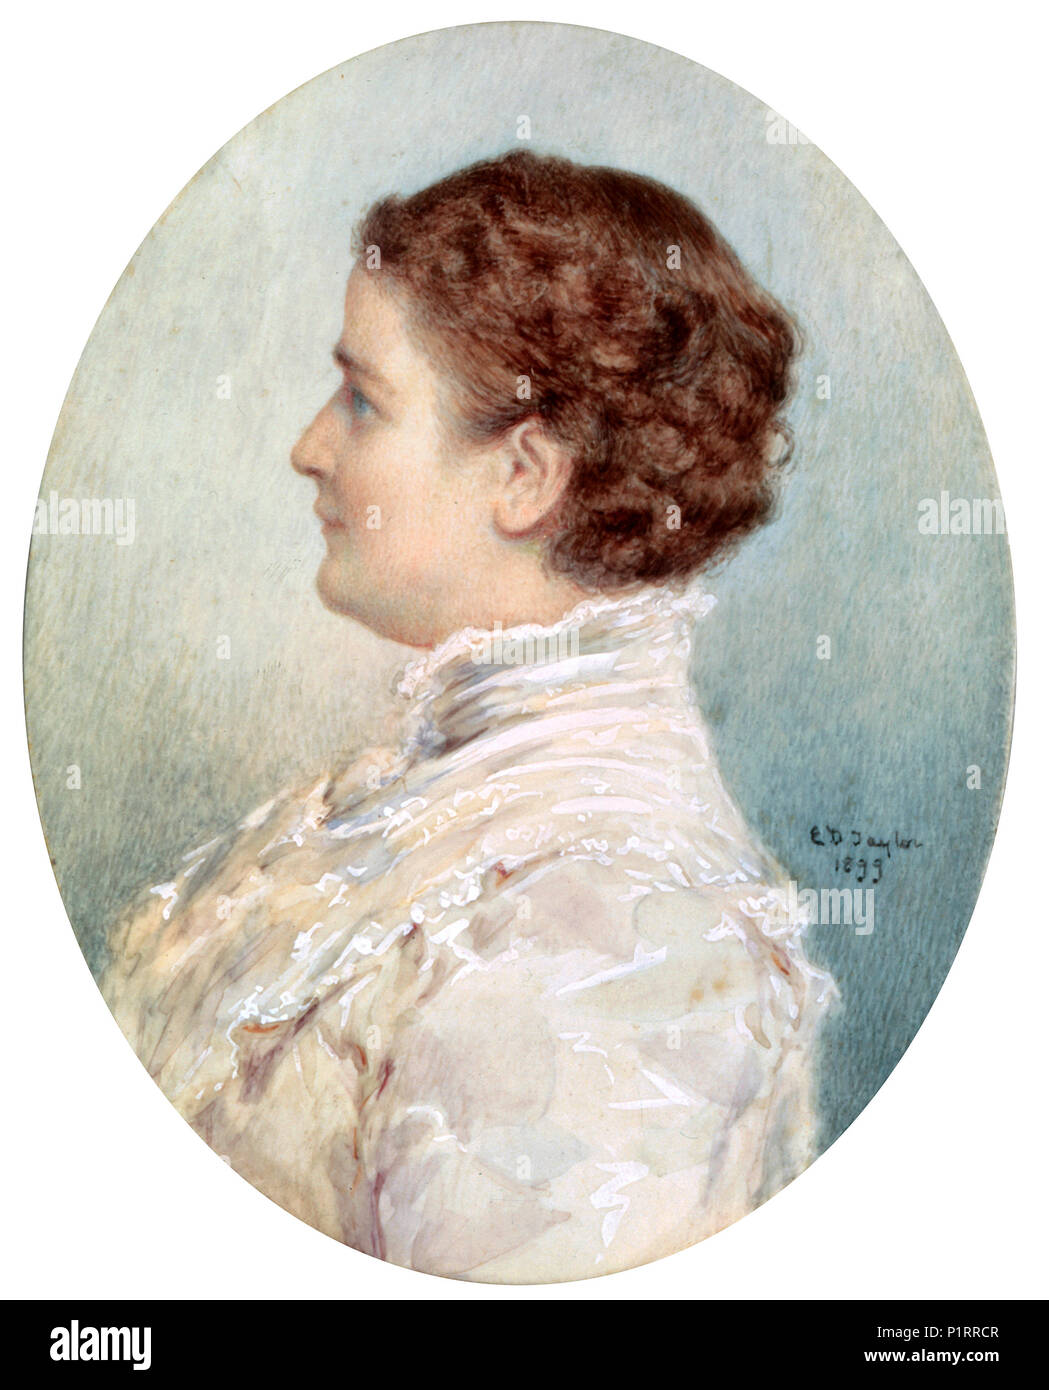 Official portrait of First Lady Ida McKinley - Emily Drayton Taylor, 1899 Stock Photo